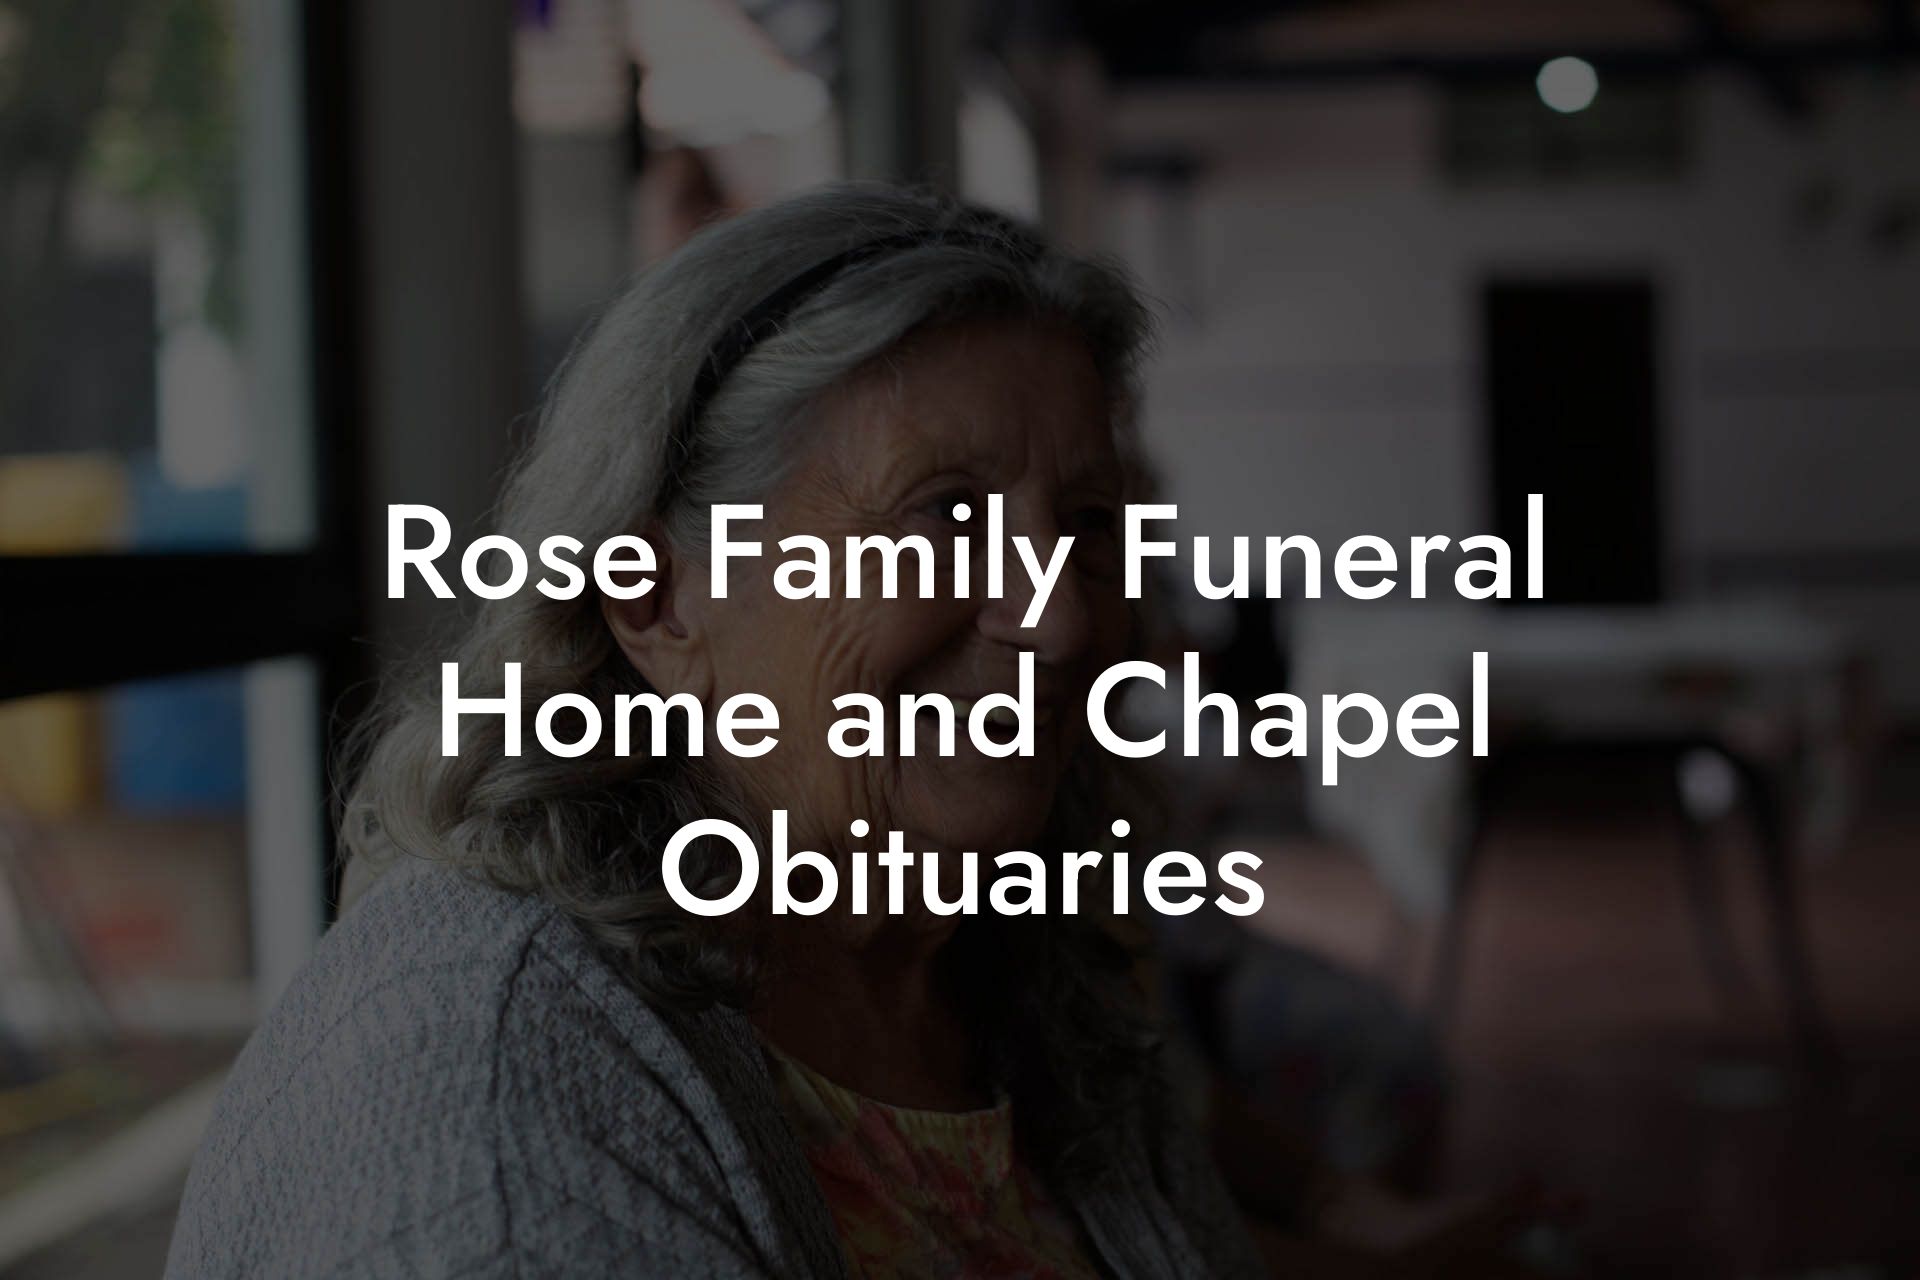 Rose Family Funeral Home and Chapel Obituaries